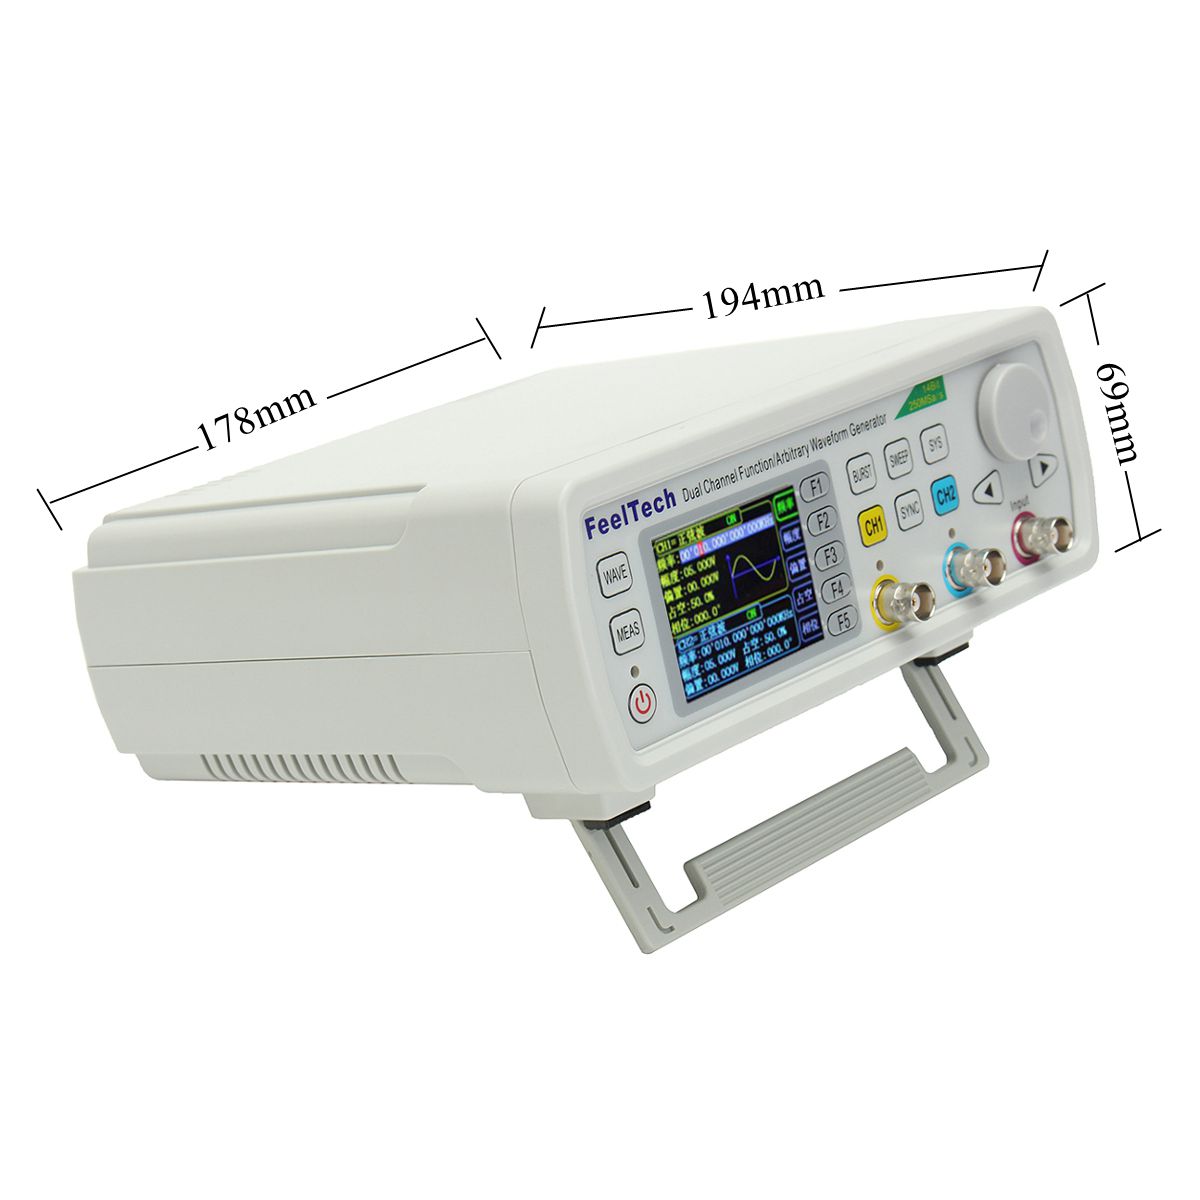 FY6600 Digital 12-60MHz Dual Channel DDS Function Arbitrary Waveform Signal Generator Frequency Meter 23